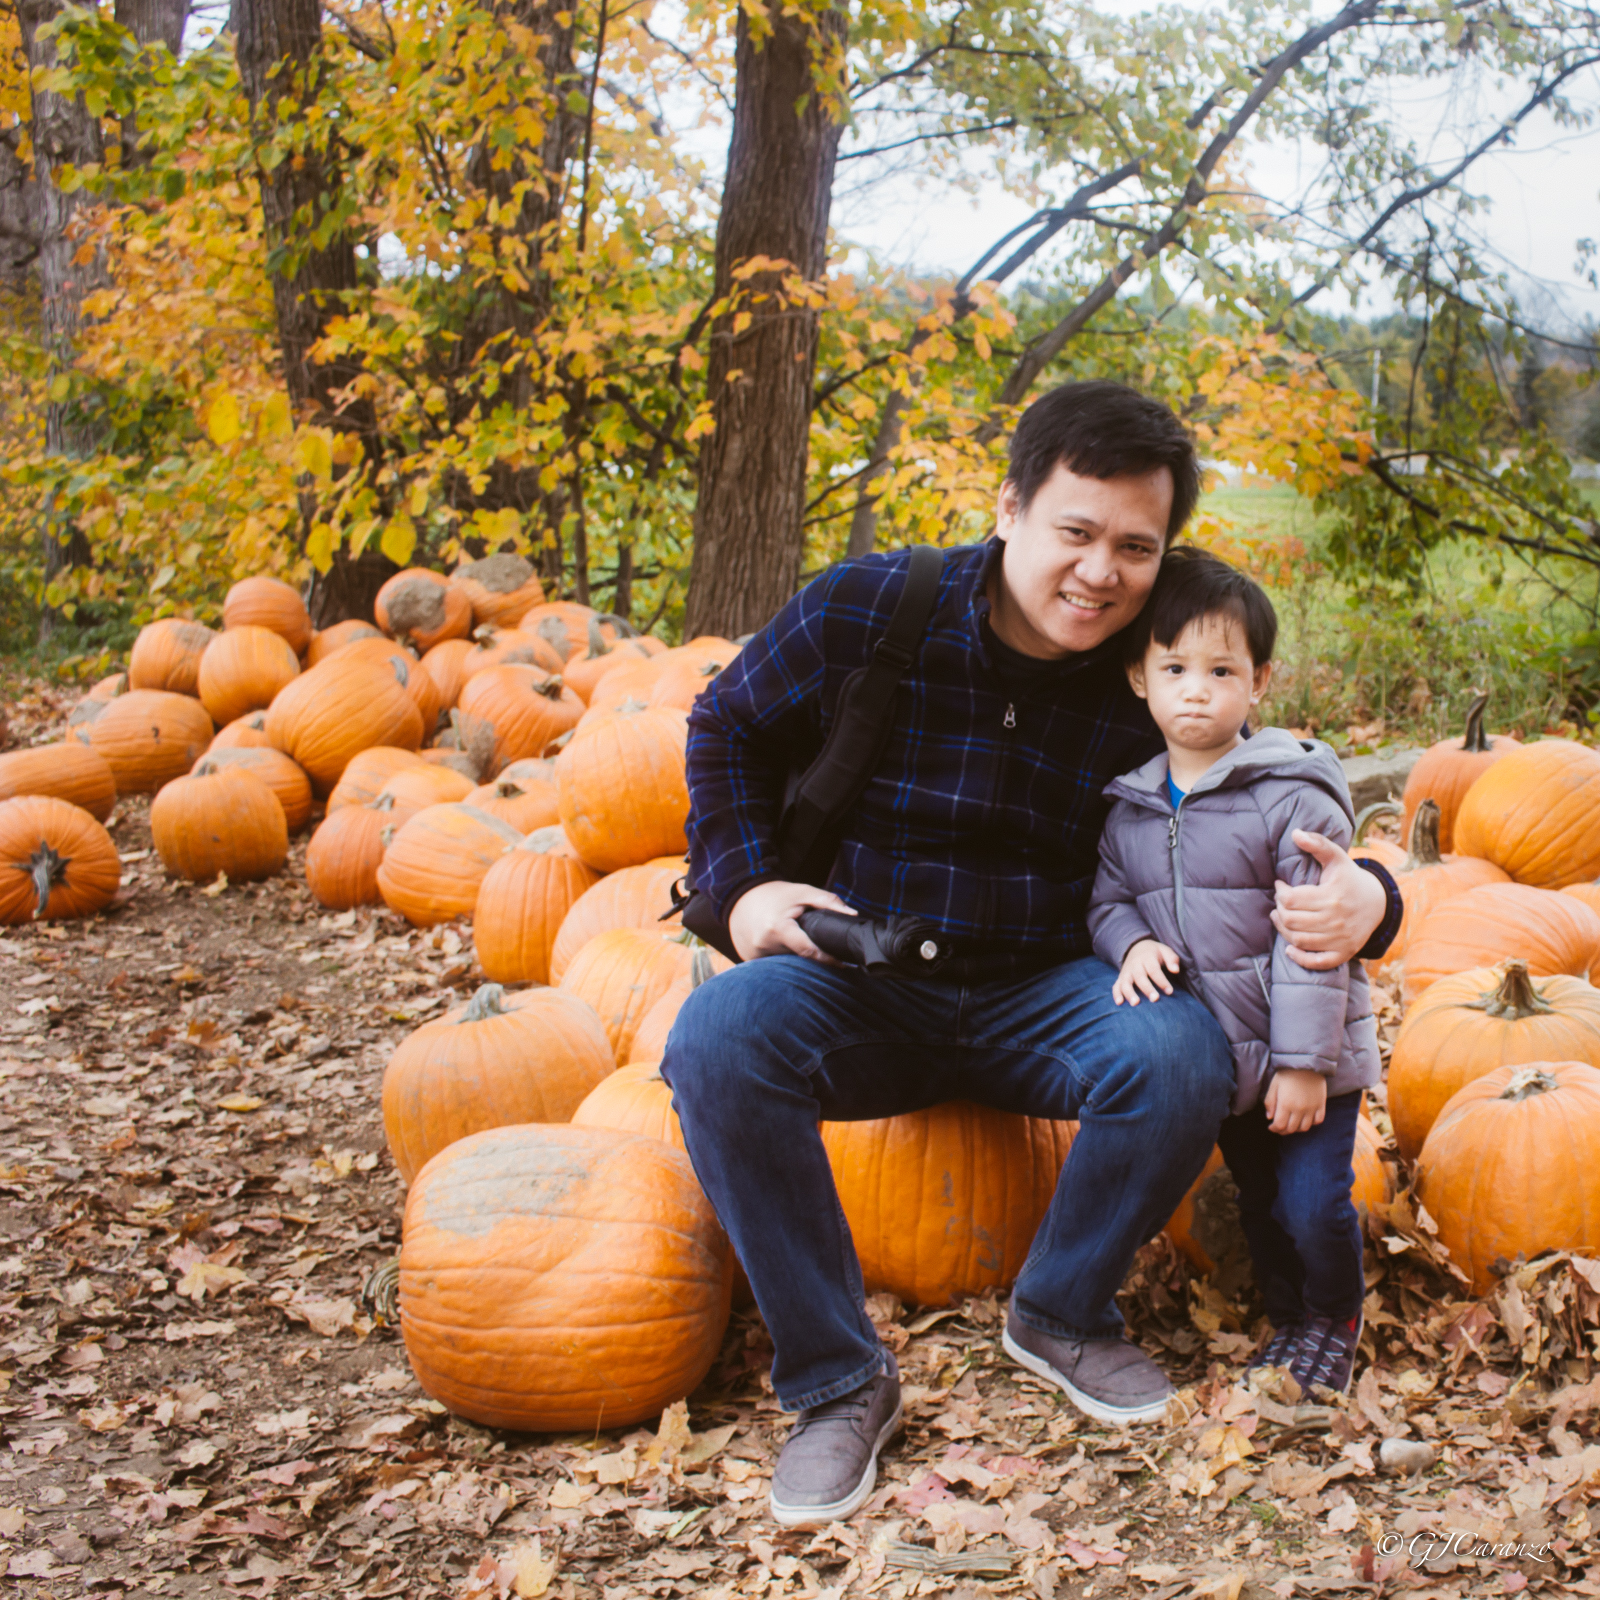 Things To Do in Ottawa, Ontario in Fall